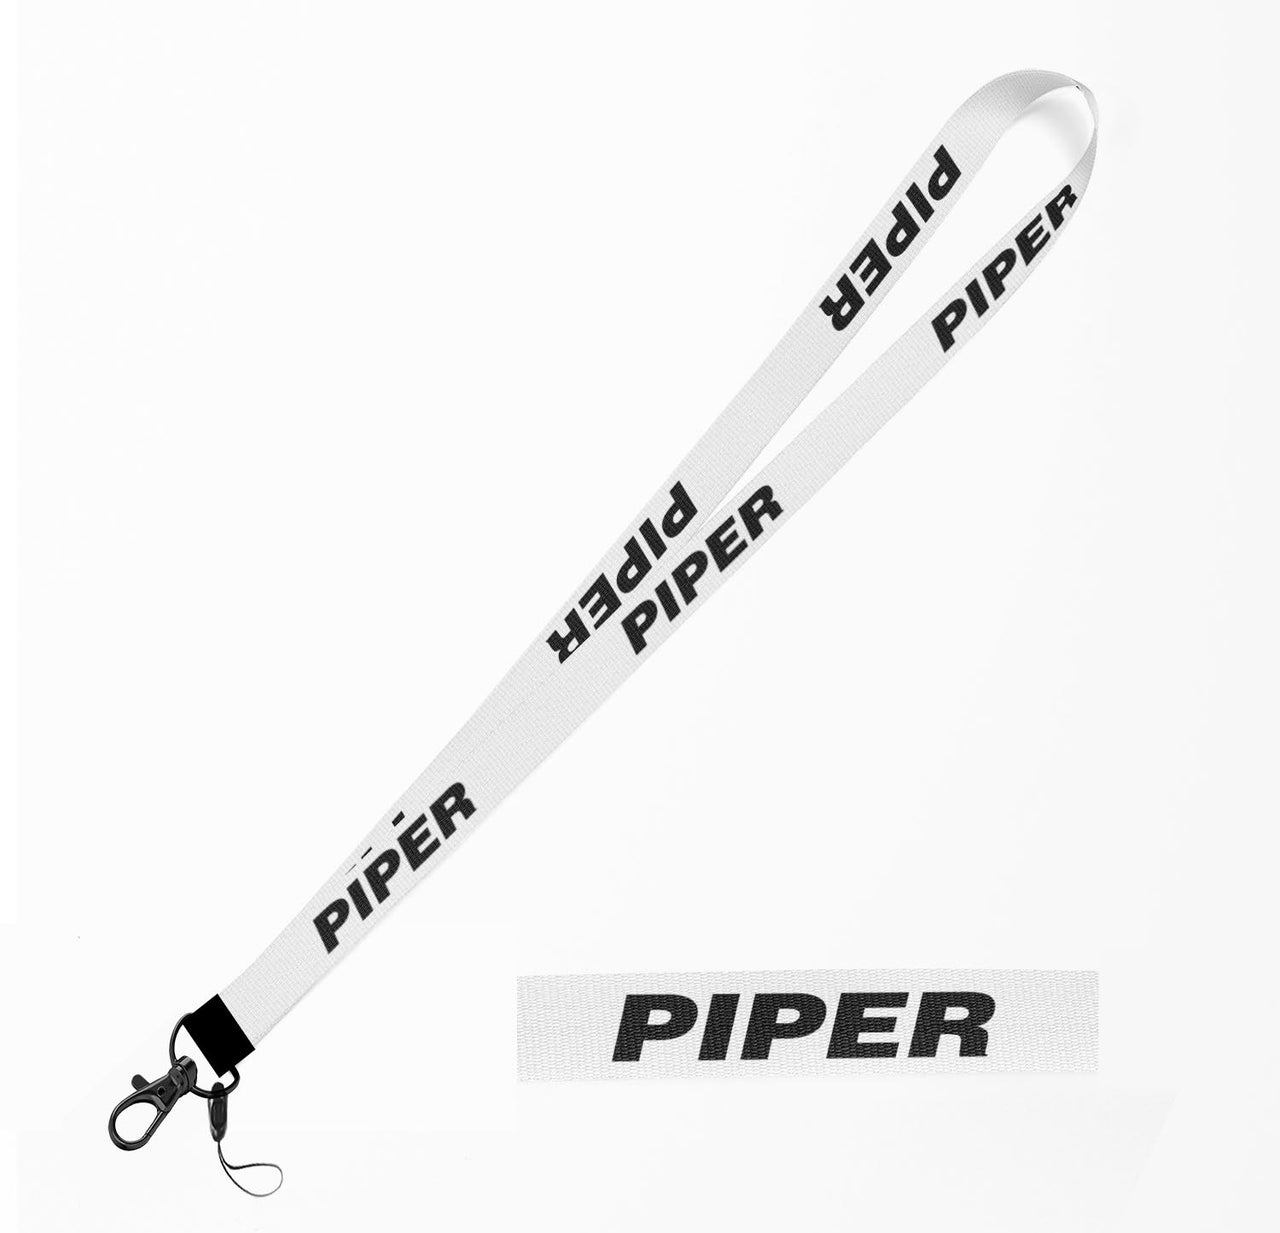 Piper & Text Designed Lanyard & ID Holders